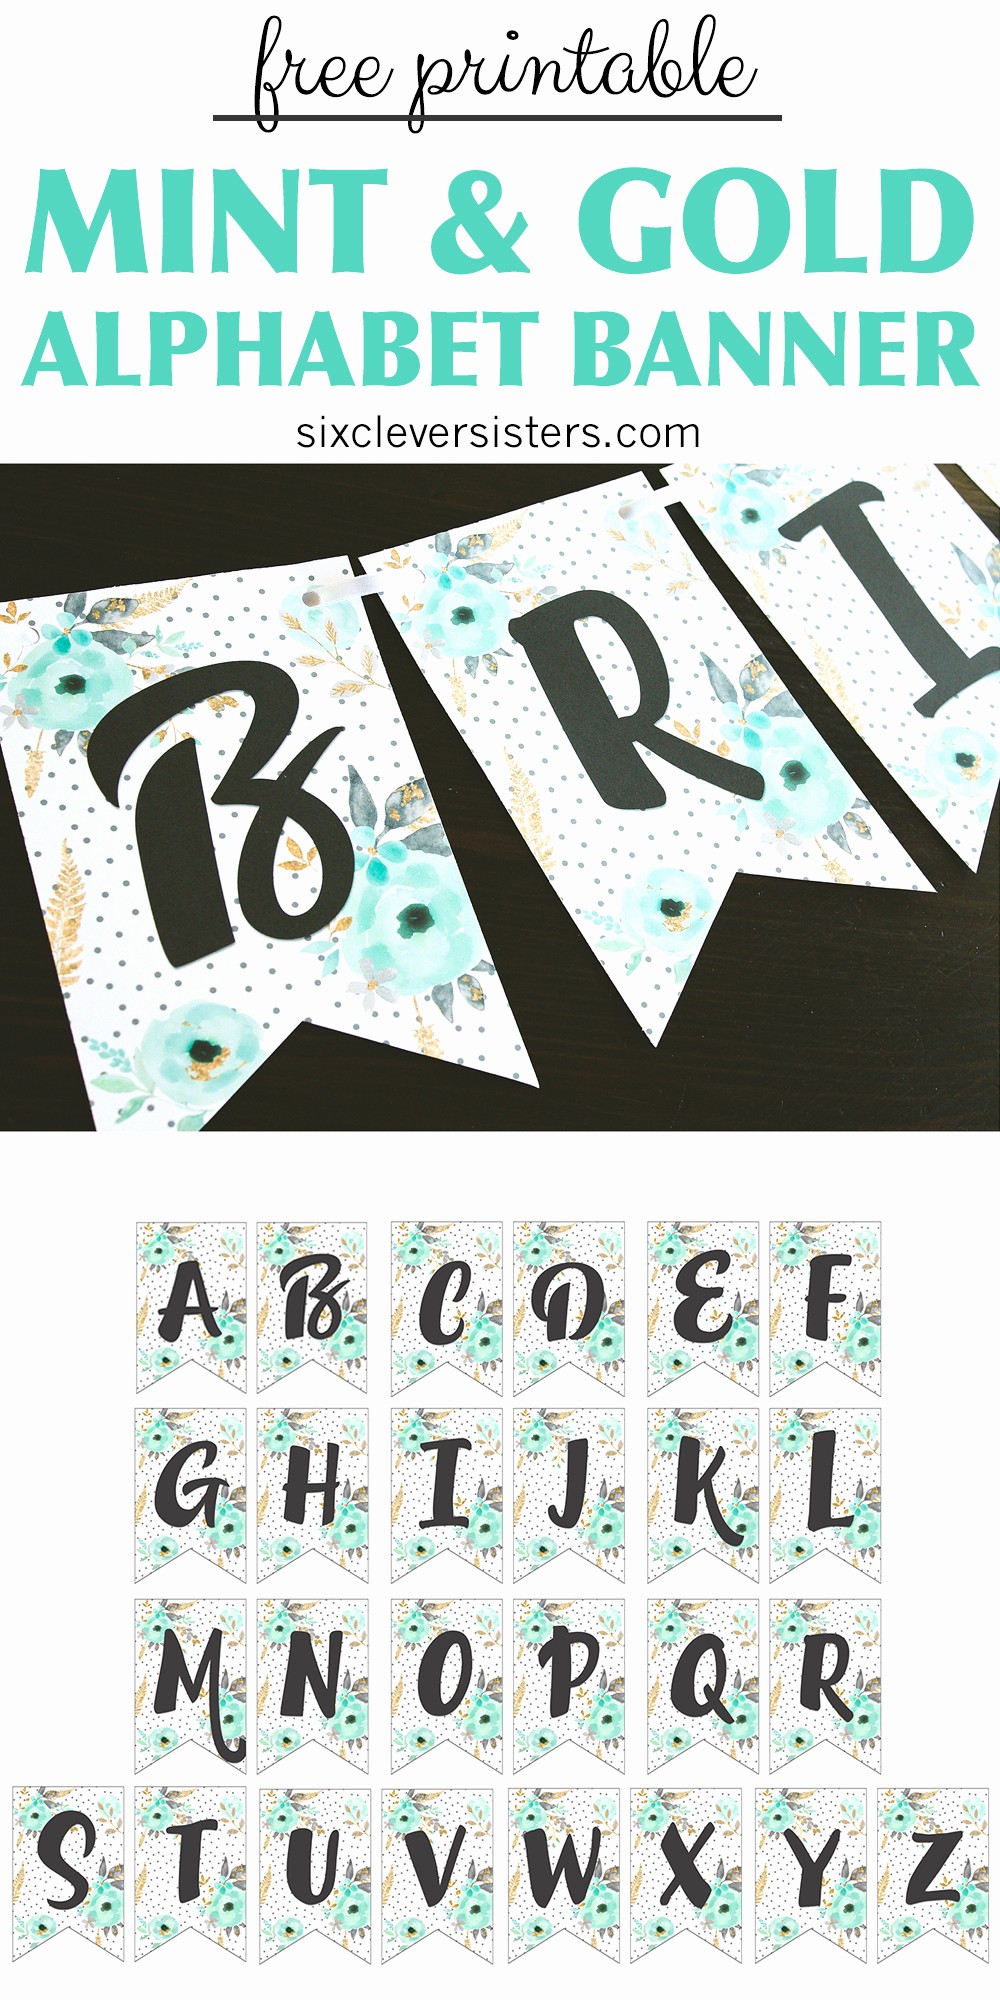 How to Make Banner Letters Best Of Free Printable Alphabet Banner Mint&amp; Gold Six Clever